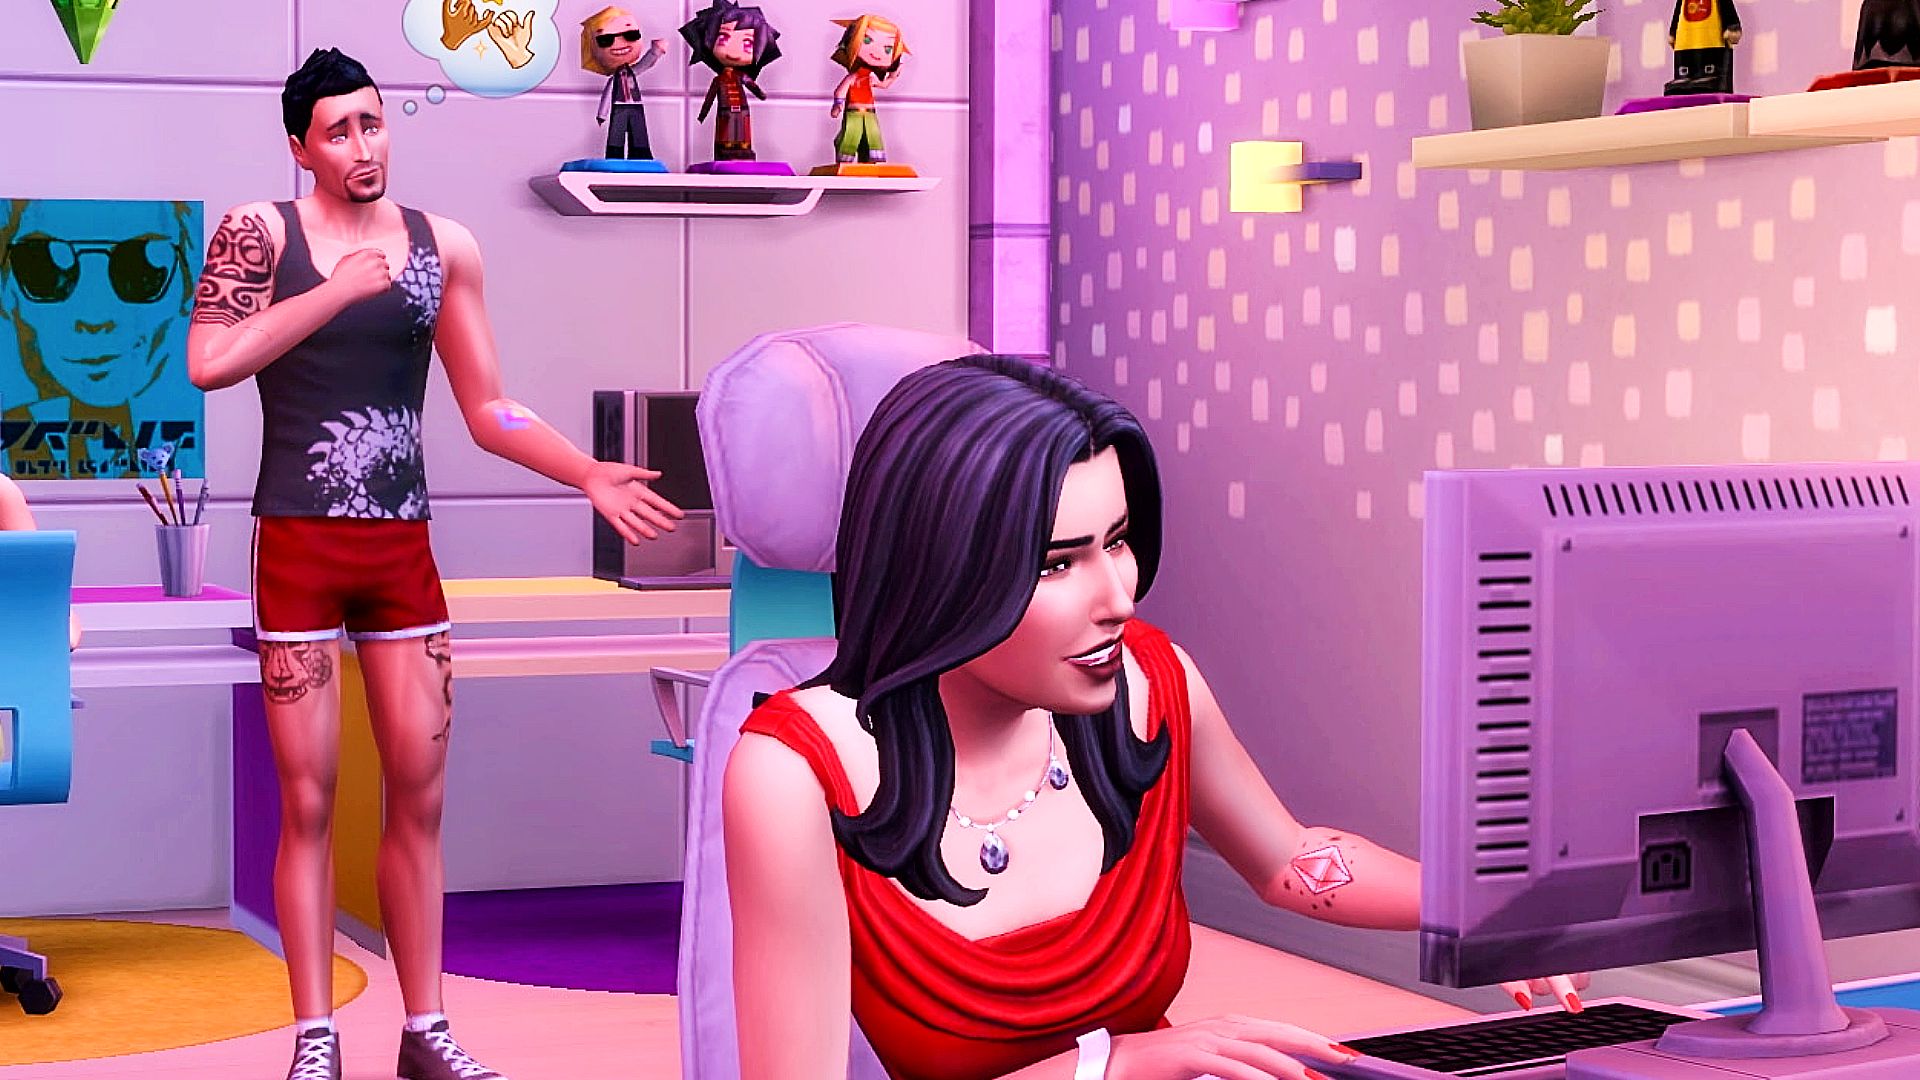 5 Sites to Find Free Sims 3 Stuff